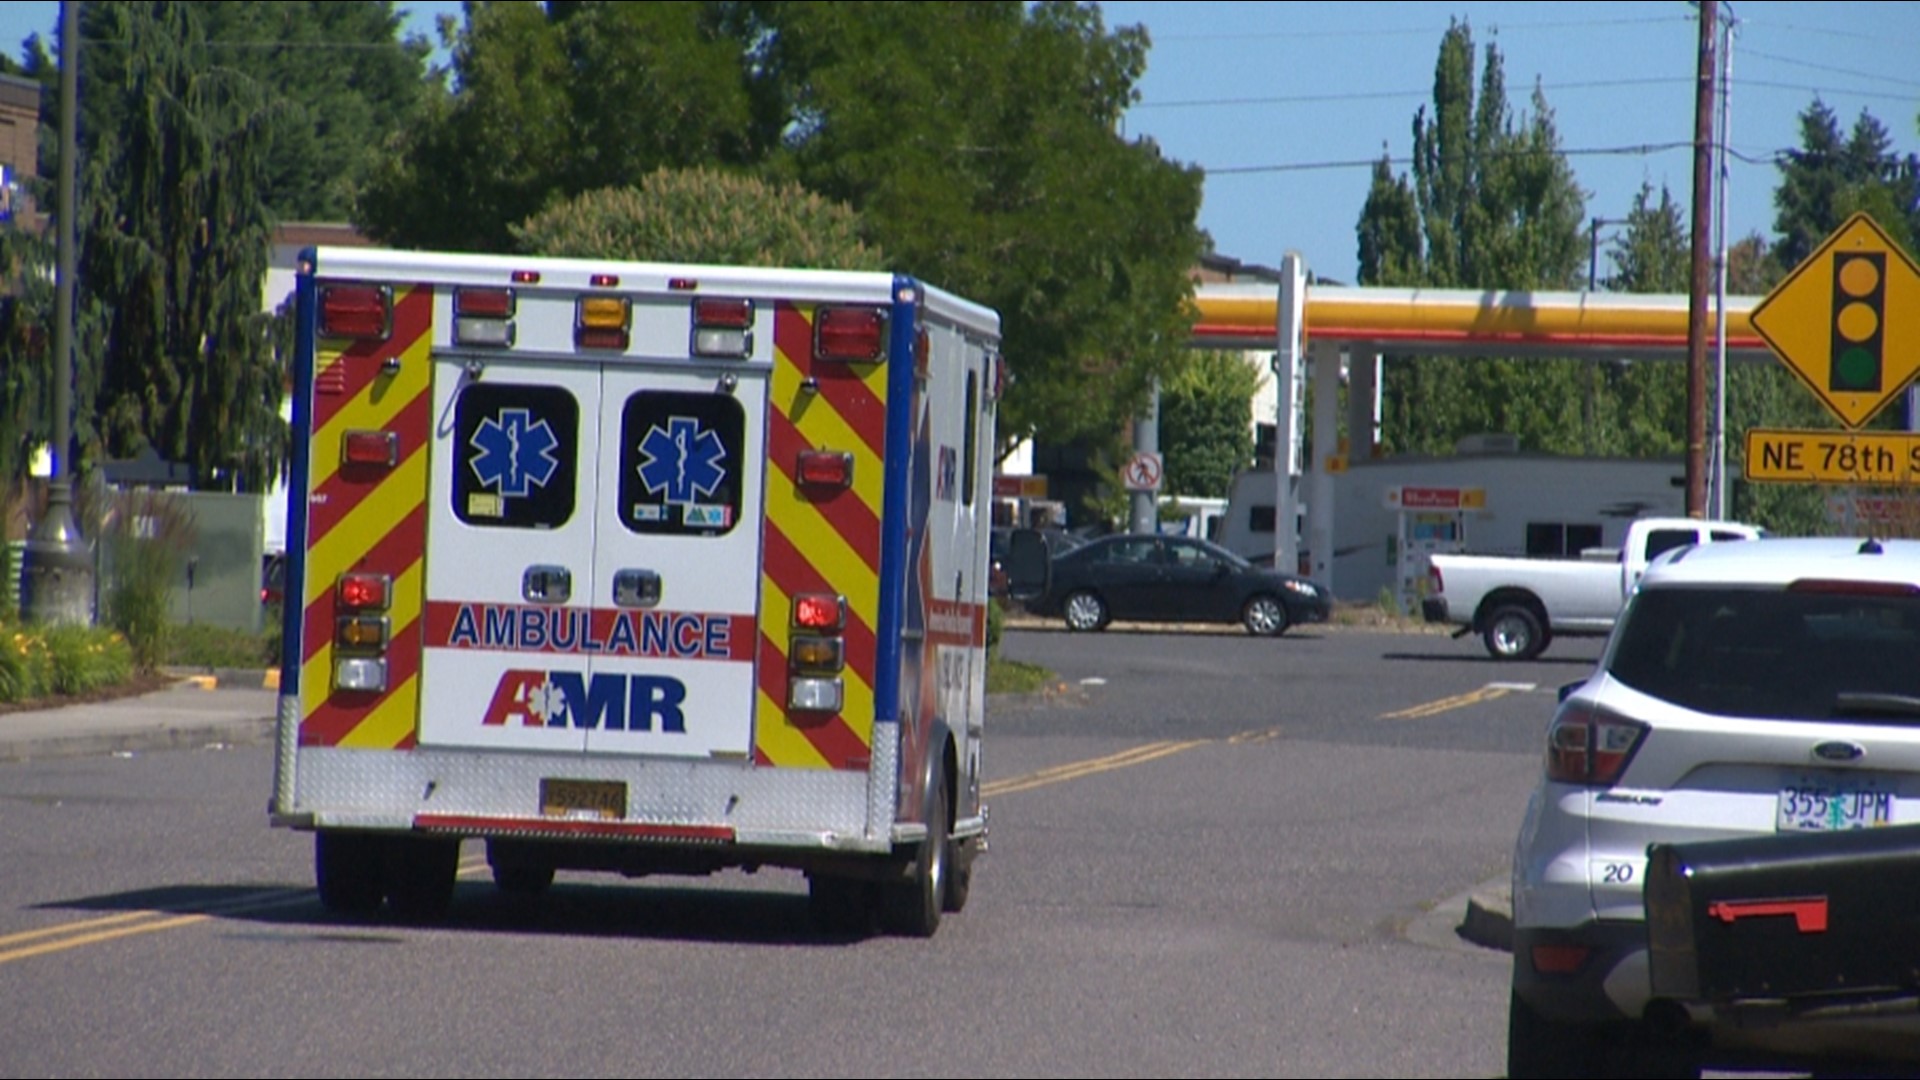 AMR has cited staffing shortages, exacerbated by Multnomah County's two-paramedic policy, as the reason why ambulances are late or unavailable for emergency calls.